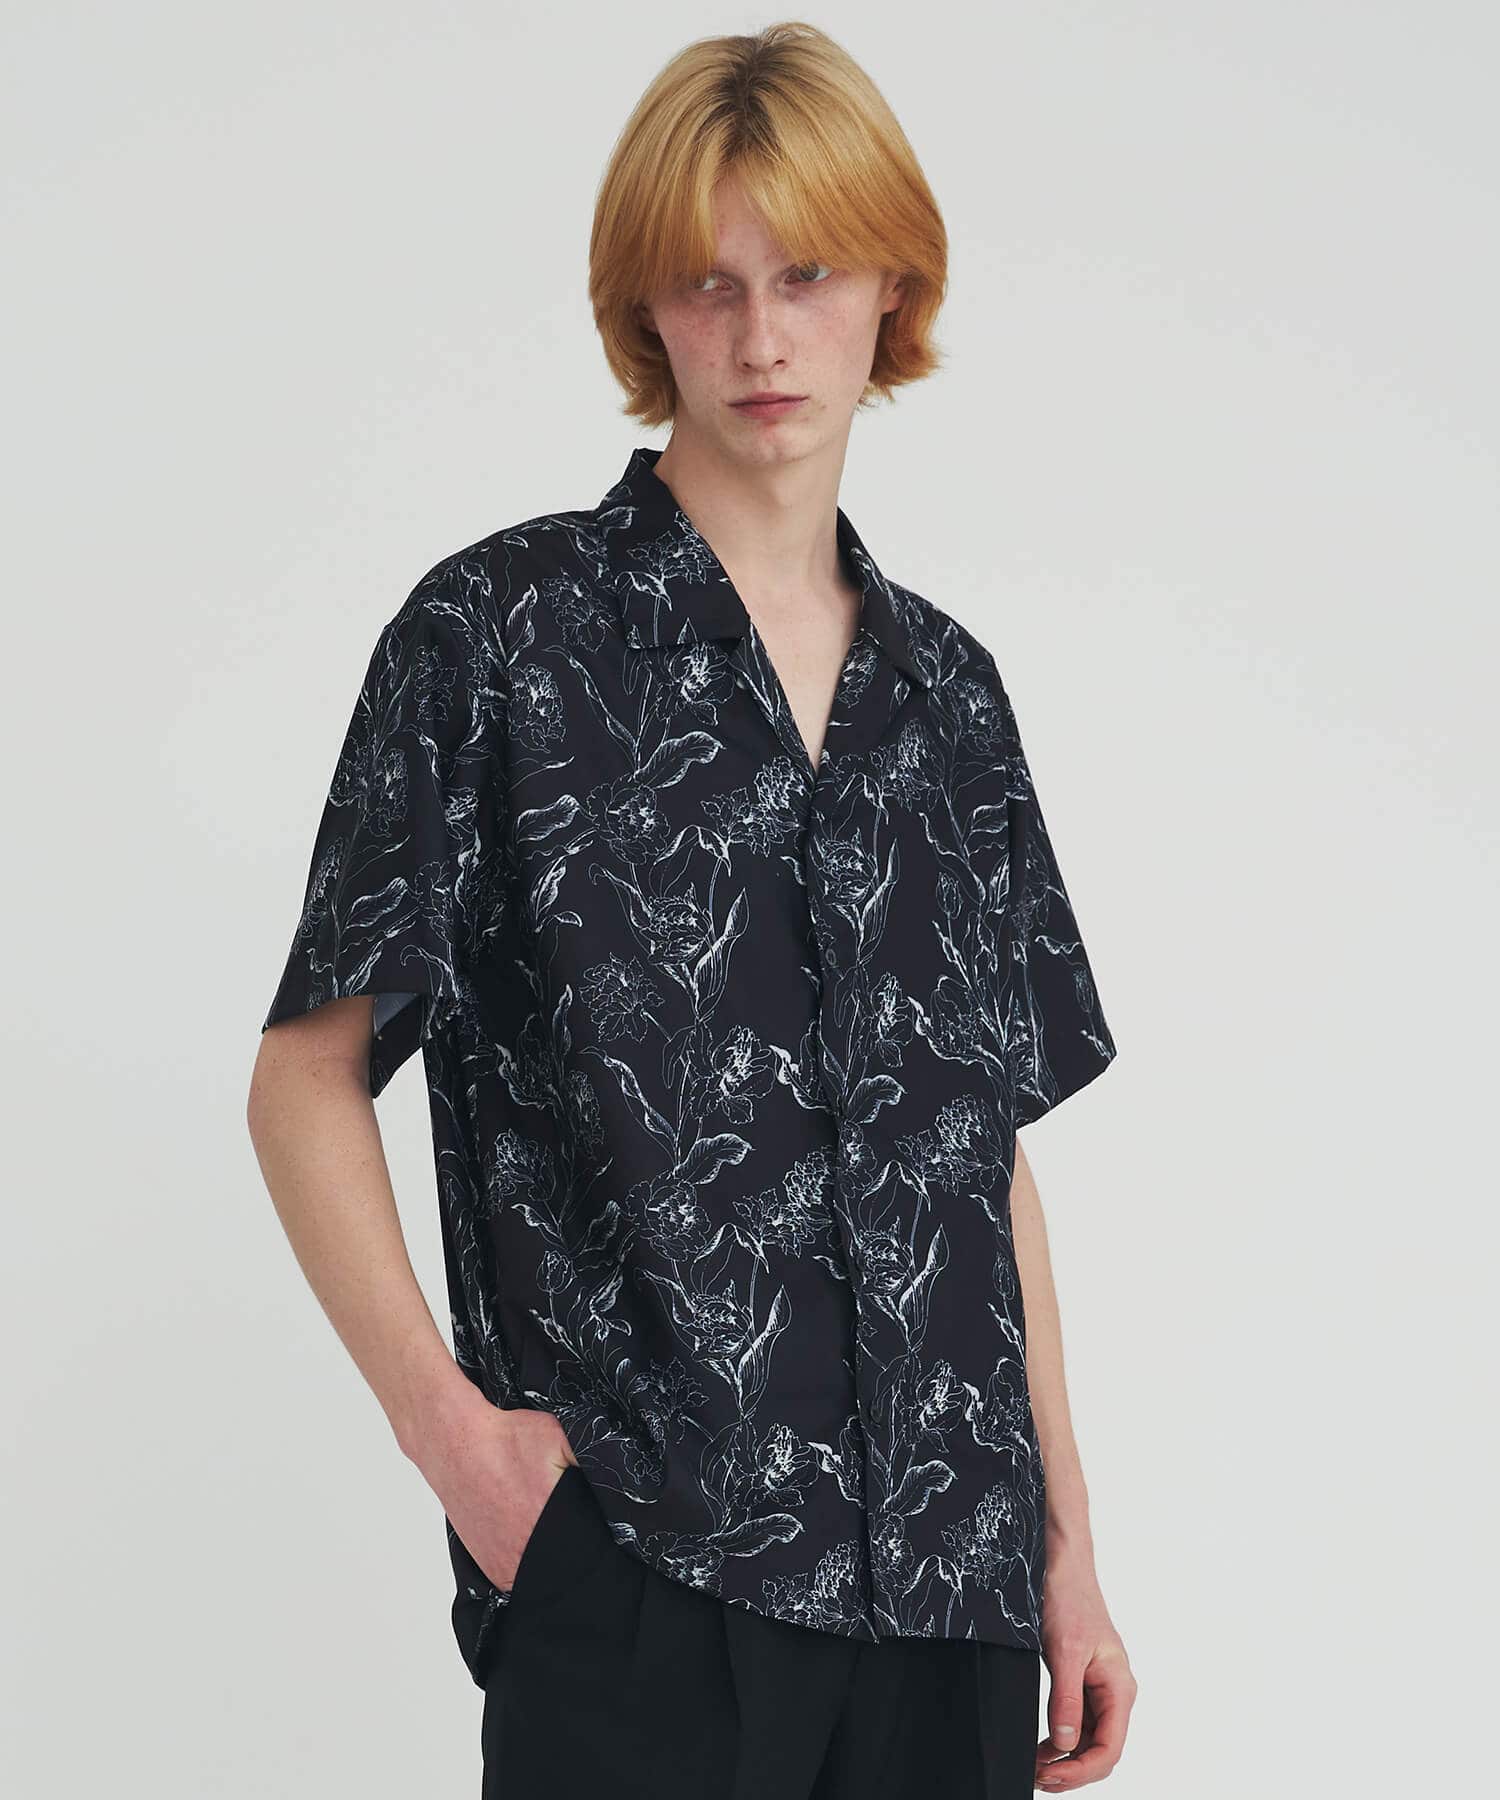 LINE DRAWING FLOWER S/S SHIRT